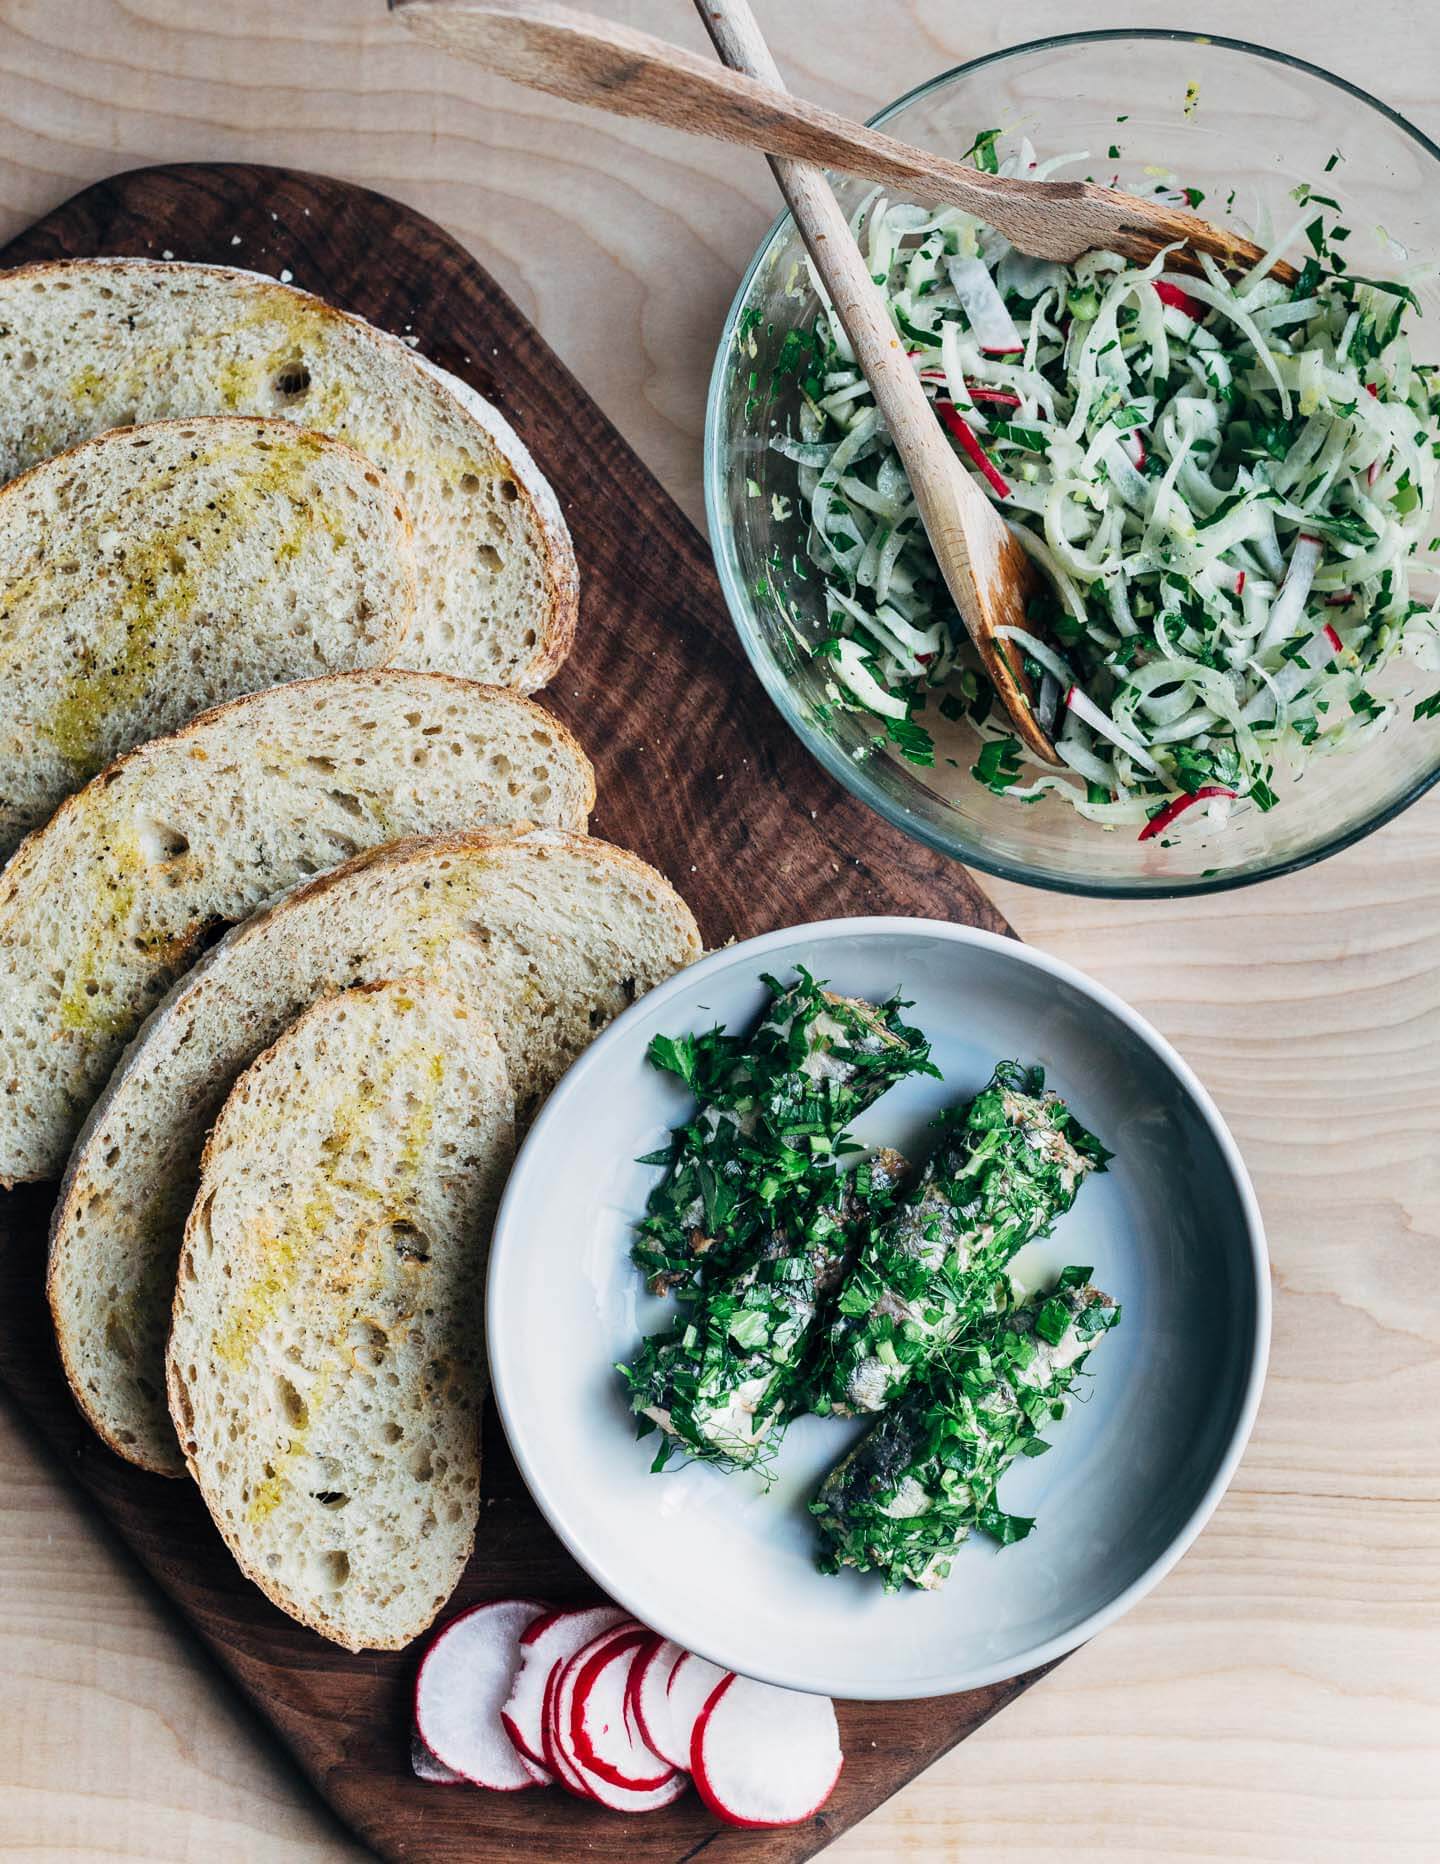 All the fixings for herbed sardine toasts: garlicky sourdough, fennel salad, and tinned sardines tossed with fresh herbs. 